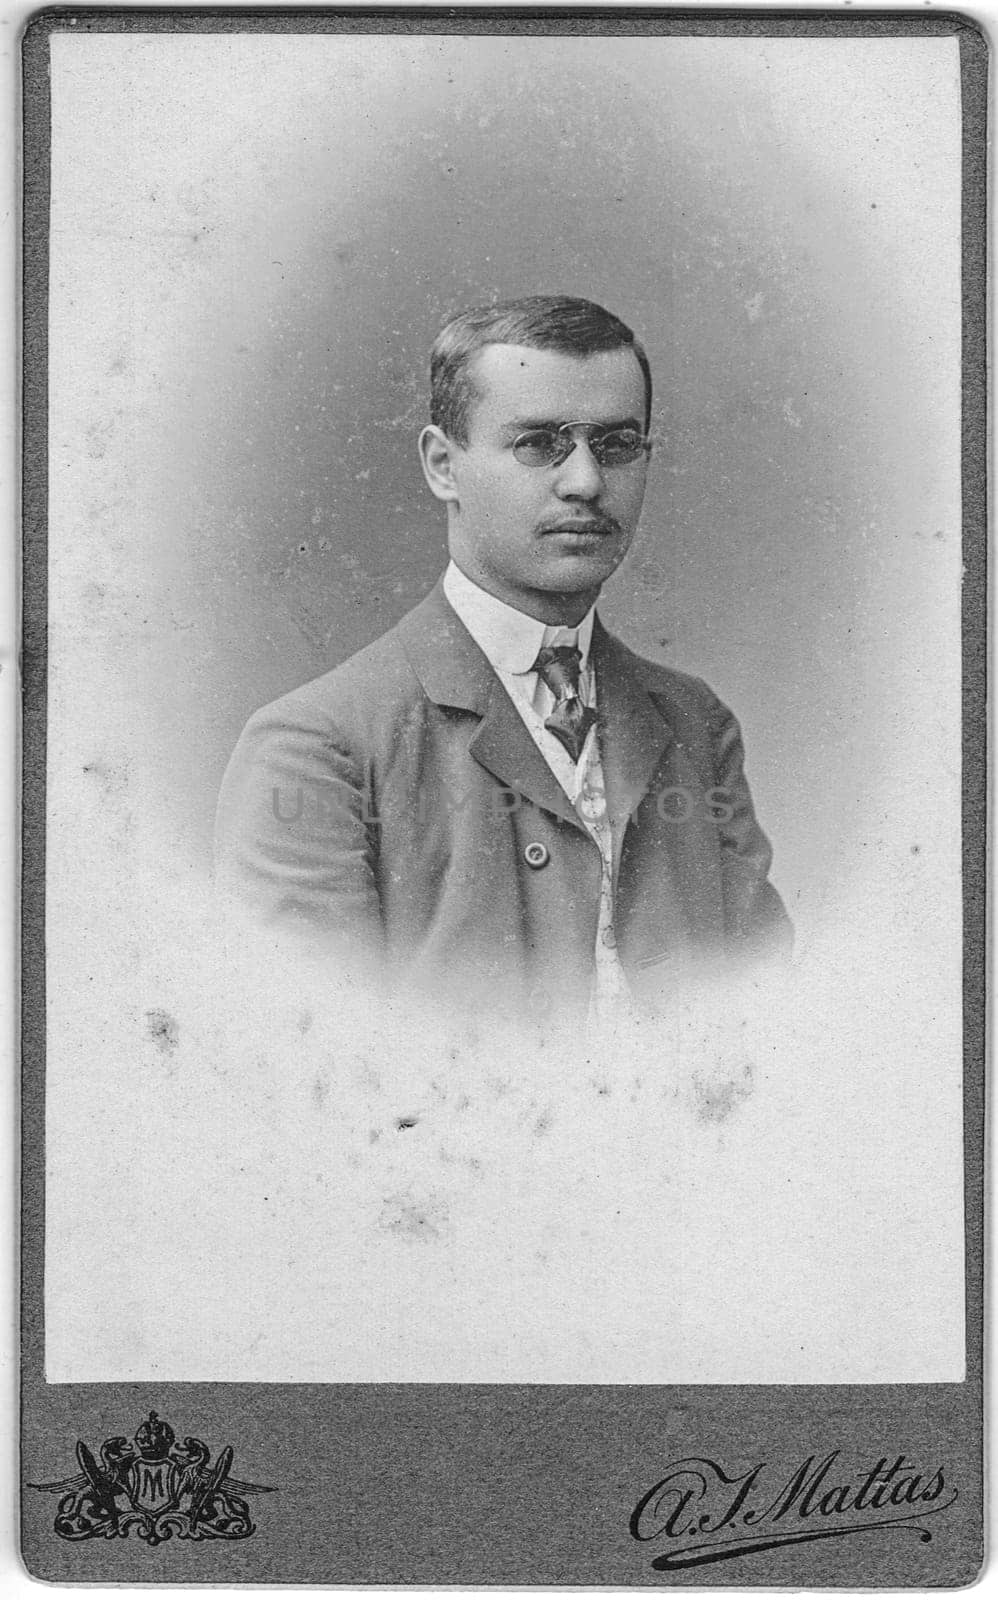 Vintage cabinet card shows portrait of young man. Photo was taken in a photo studio. by roman_nerud